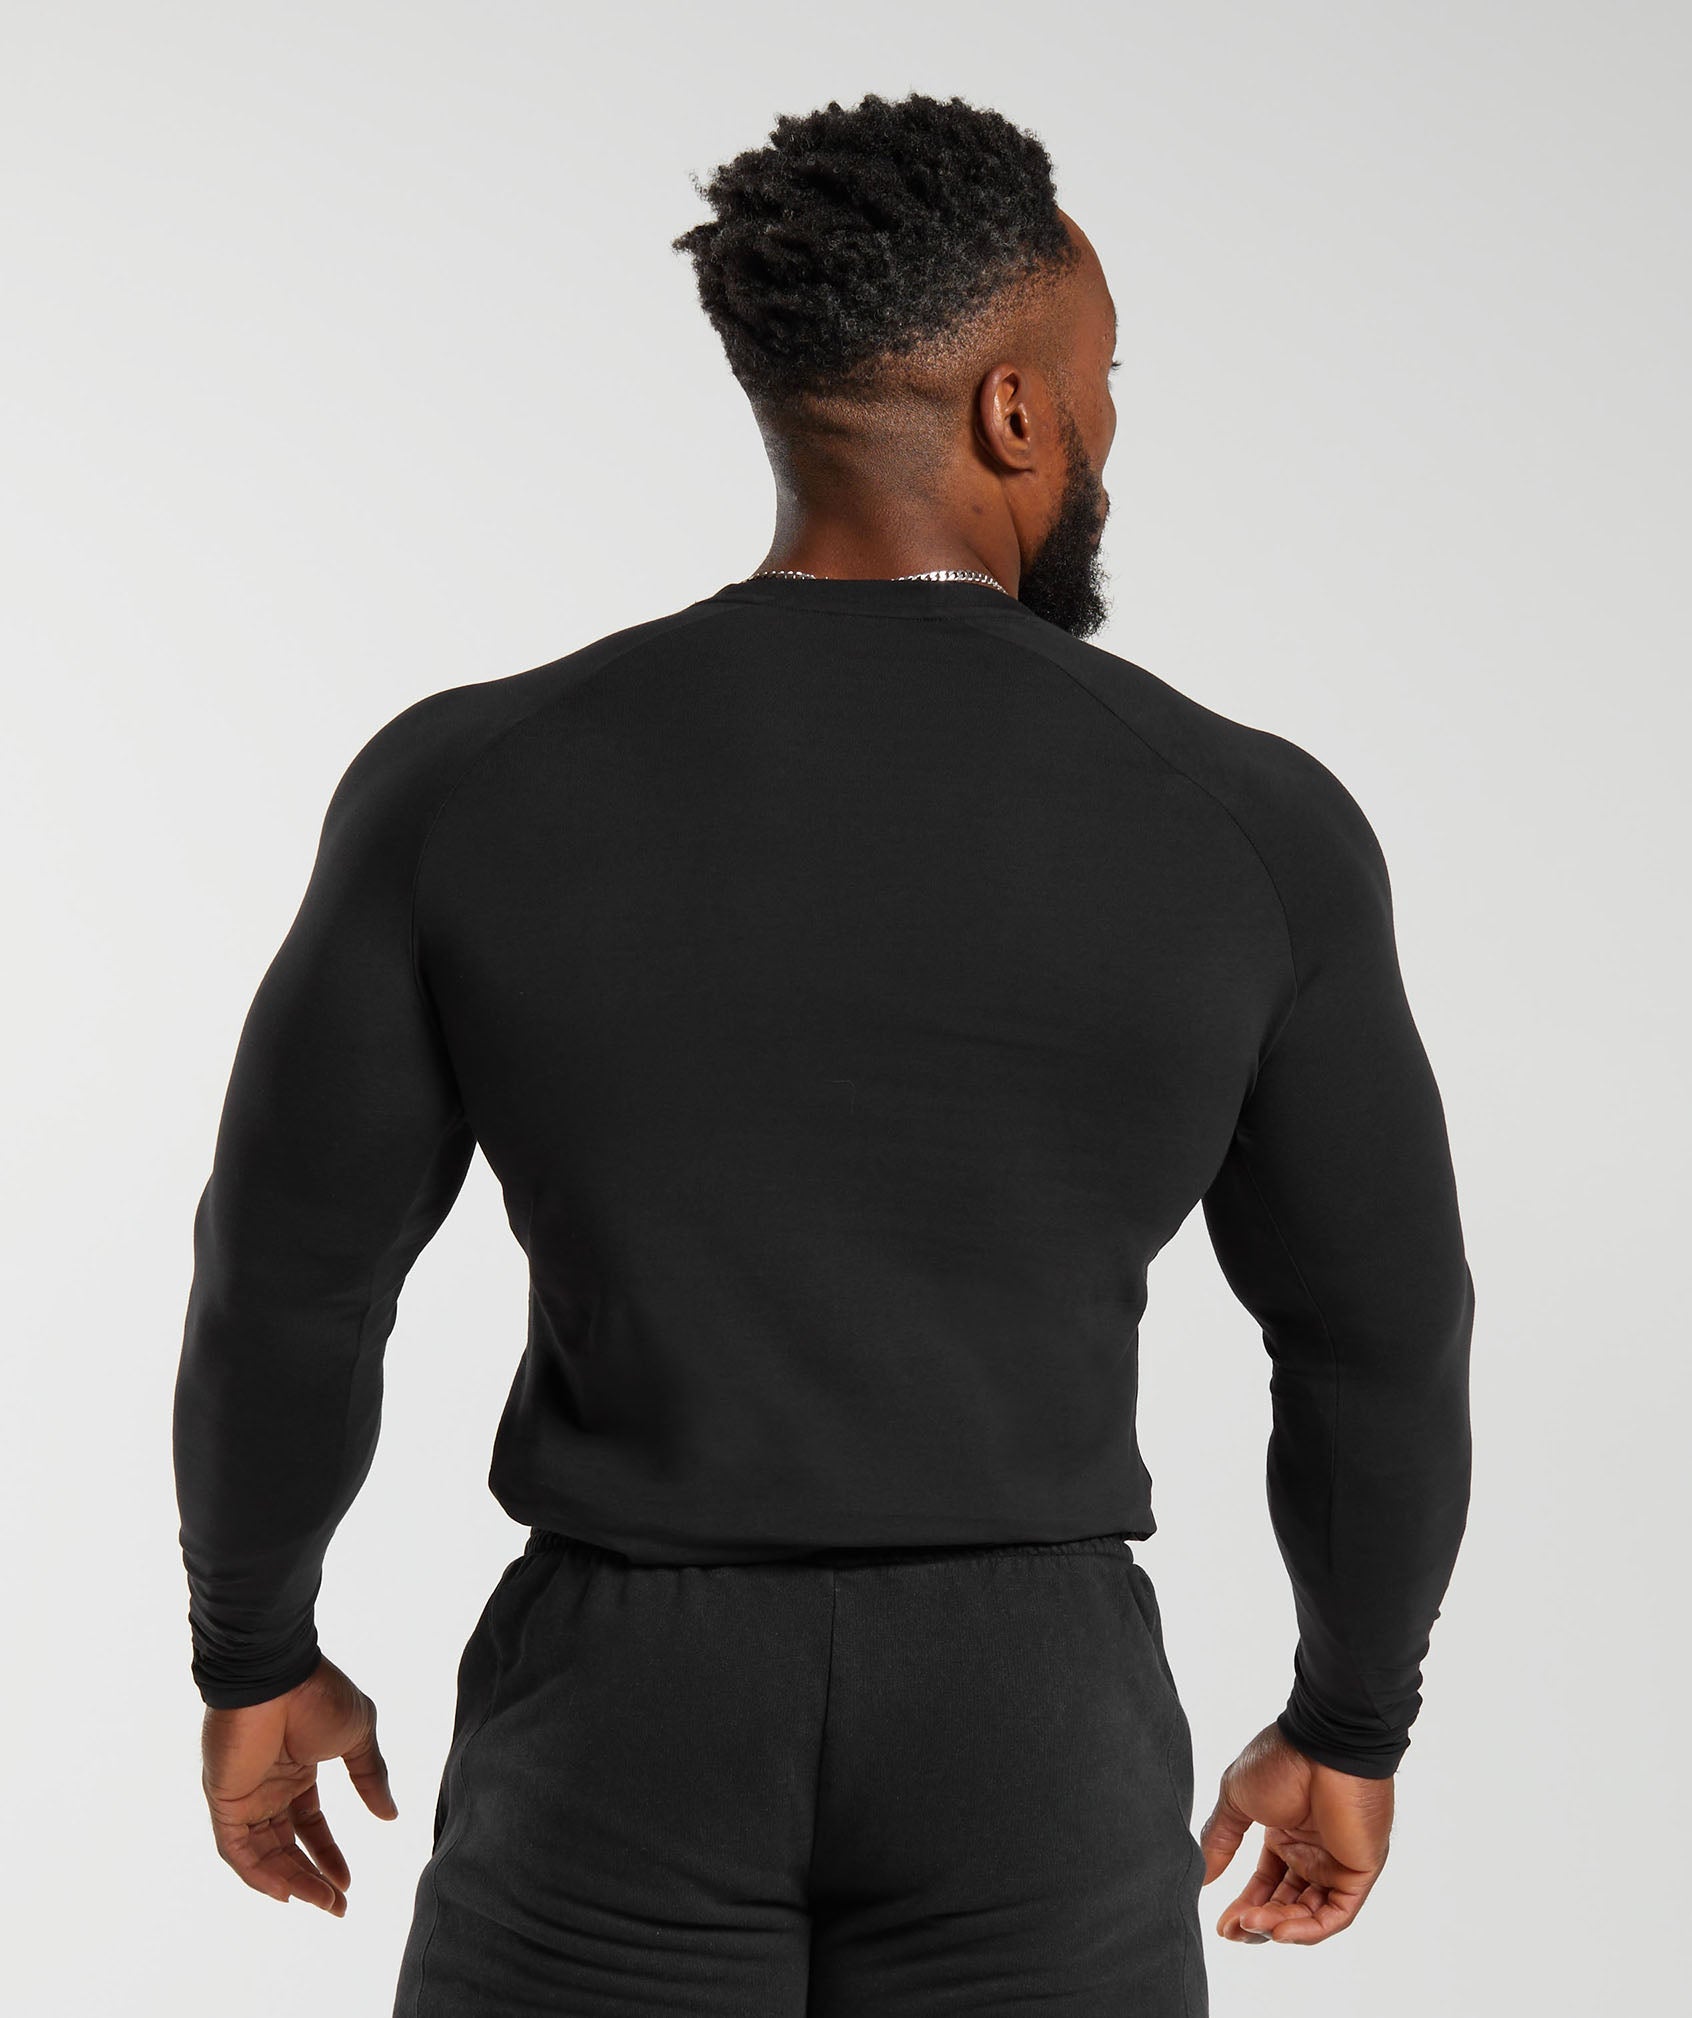 Apollo Long Sleeve T-Shirt in Black/Silhouette Grey - view 2